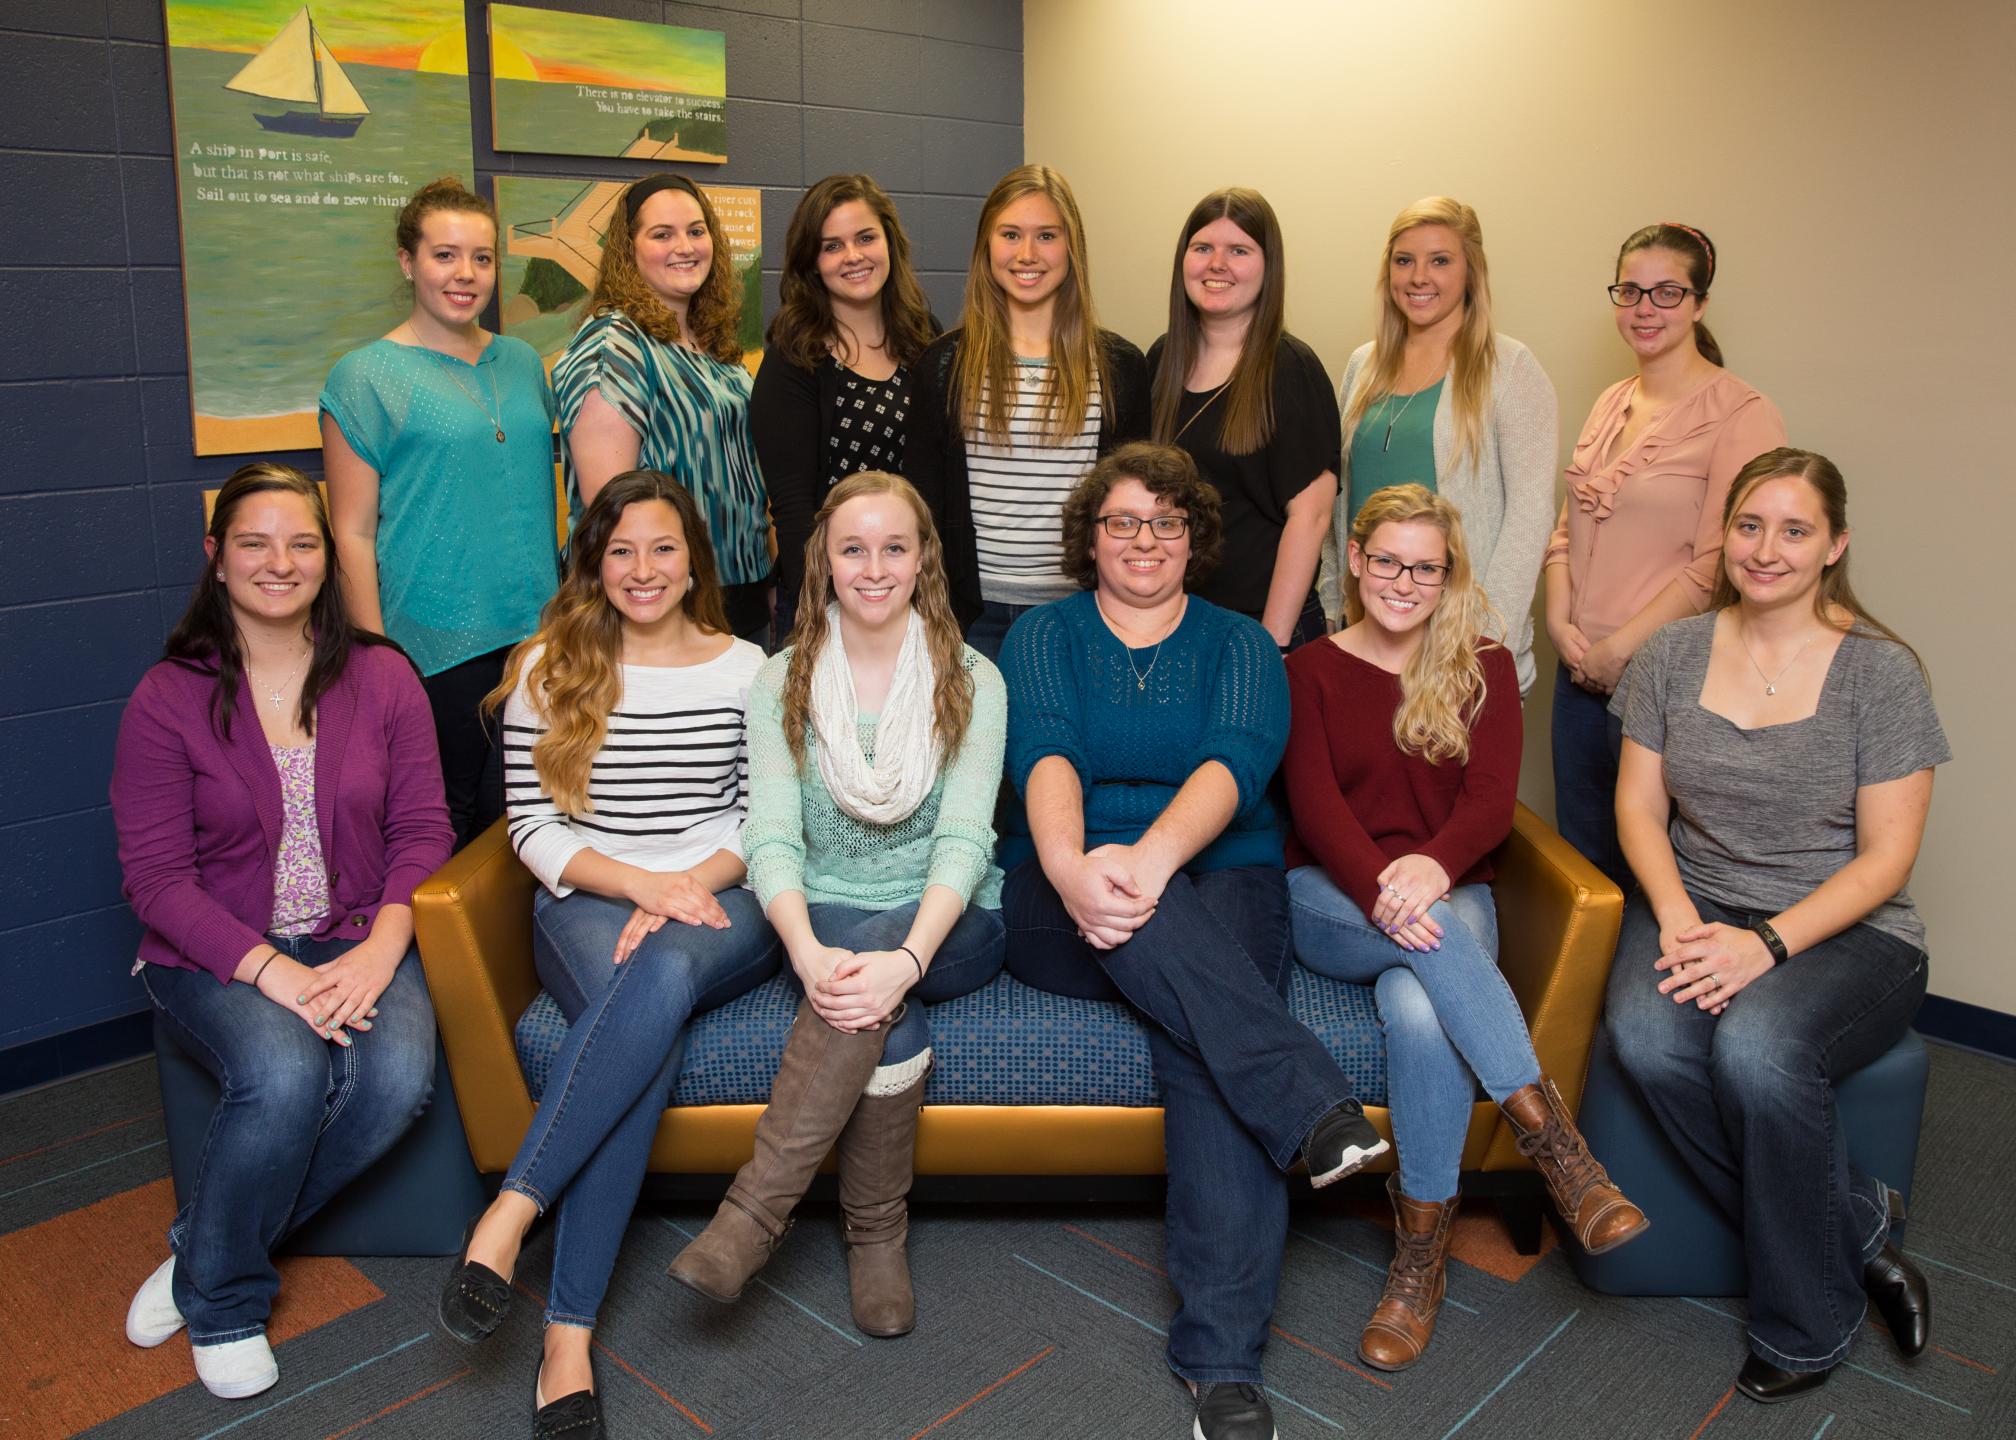 The SWE conference planning team. Pictured left to right (back row) are Tessa Janssen, Paige Black, Katie Carlson, Hannah Ihlenfeldt, Mandy Thompson, Lynsey Hanley and Kelsey Schillinger. Pictured left to right (front row) are Alyssa Whiteaker, Astrid Lavell, Amy True, Hailey Myers, Louise Lloyd and Steph Droessler (from the Professional SWE Dubuque). Not pictured: Ali Roth, Jane Beyer and Heather Hubbard. 